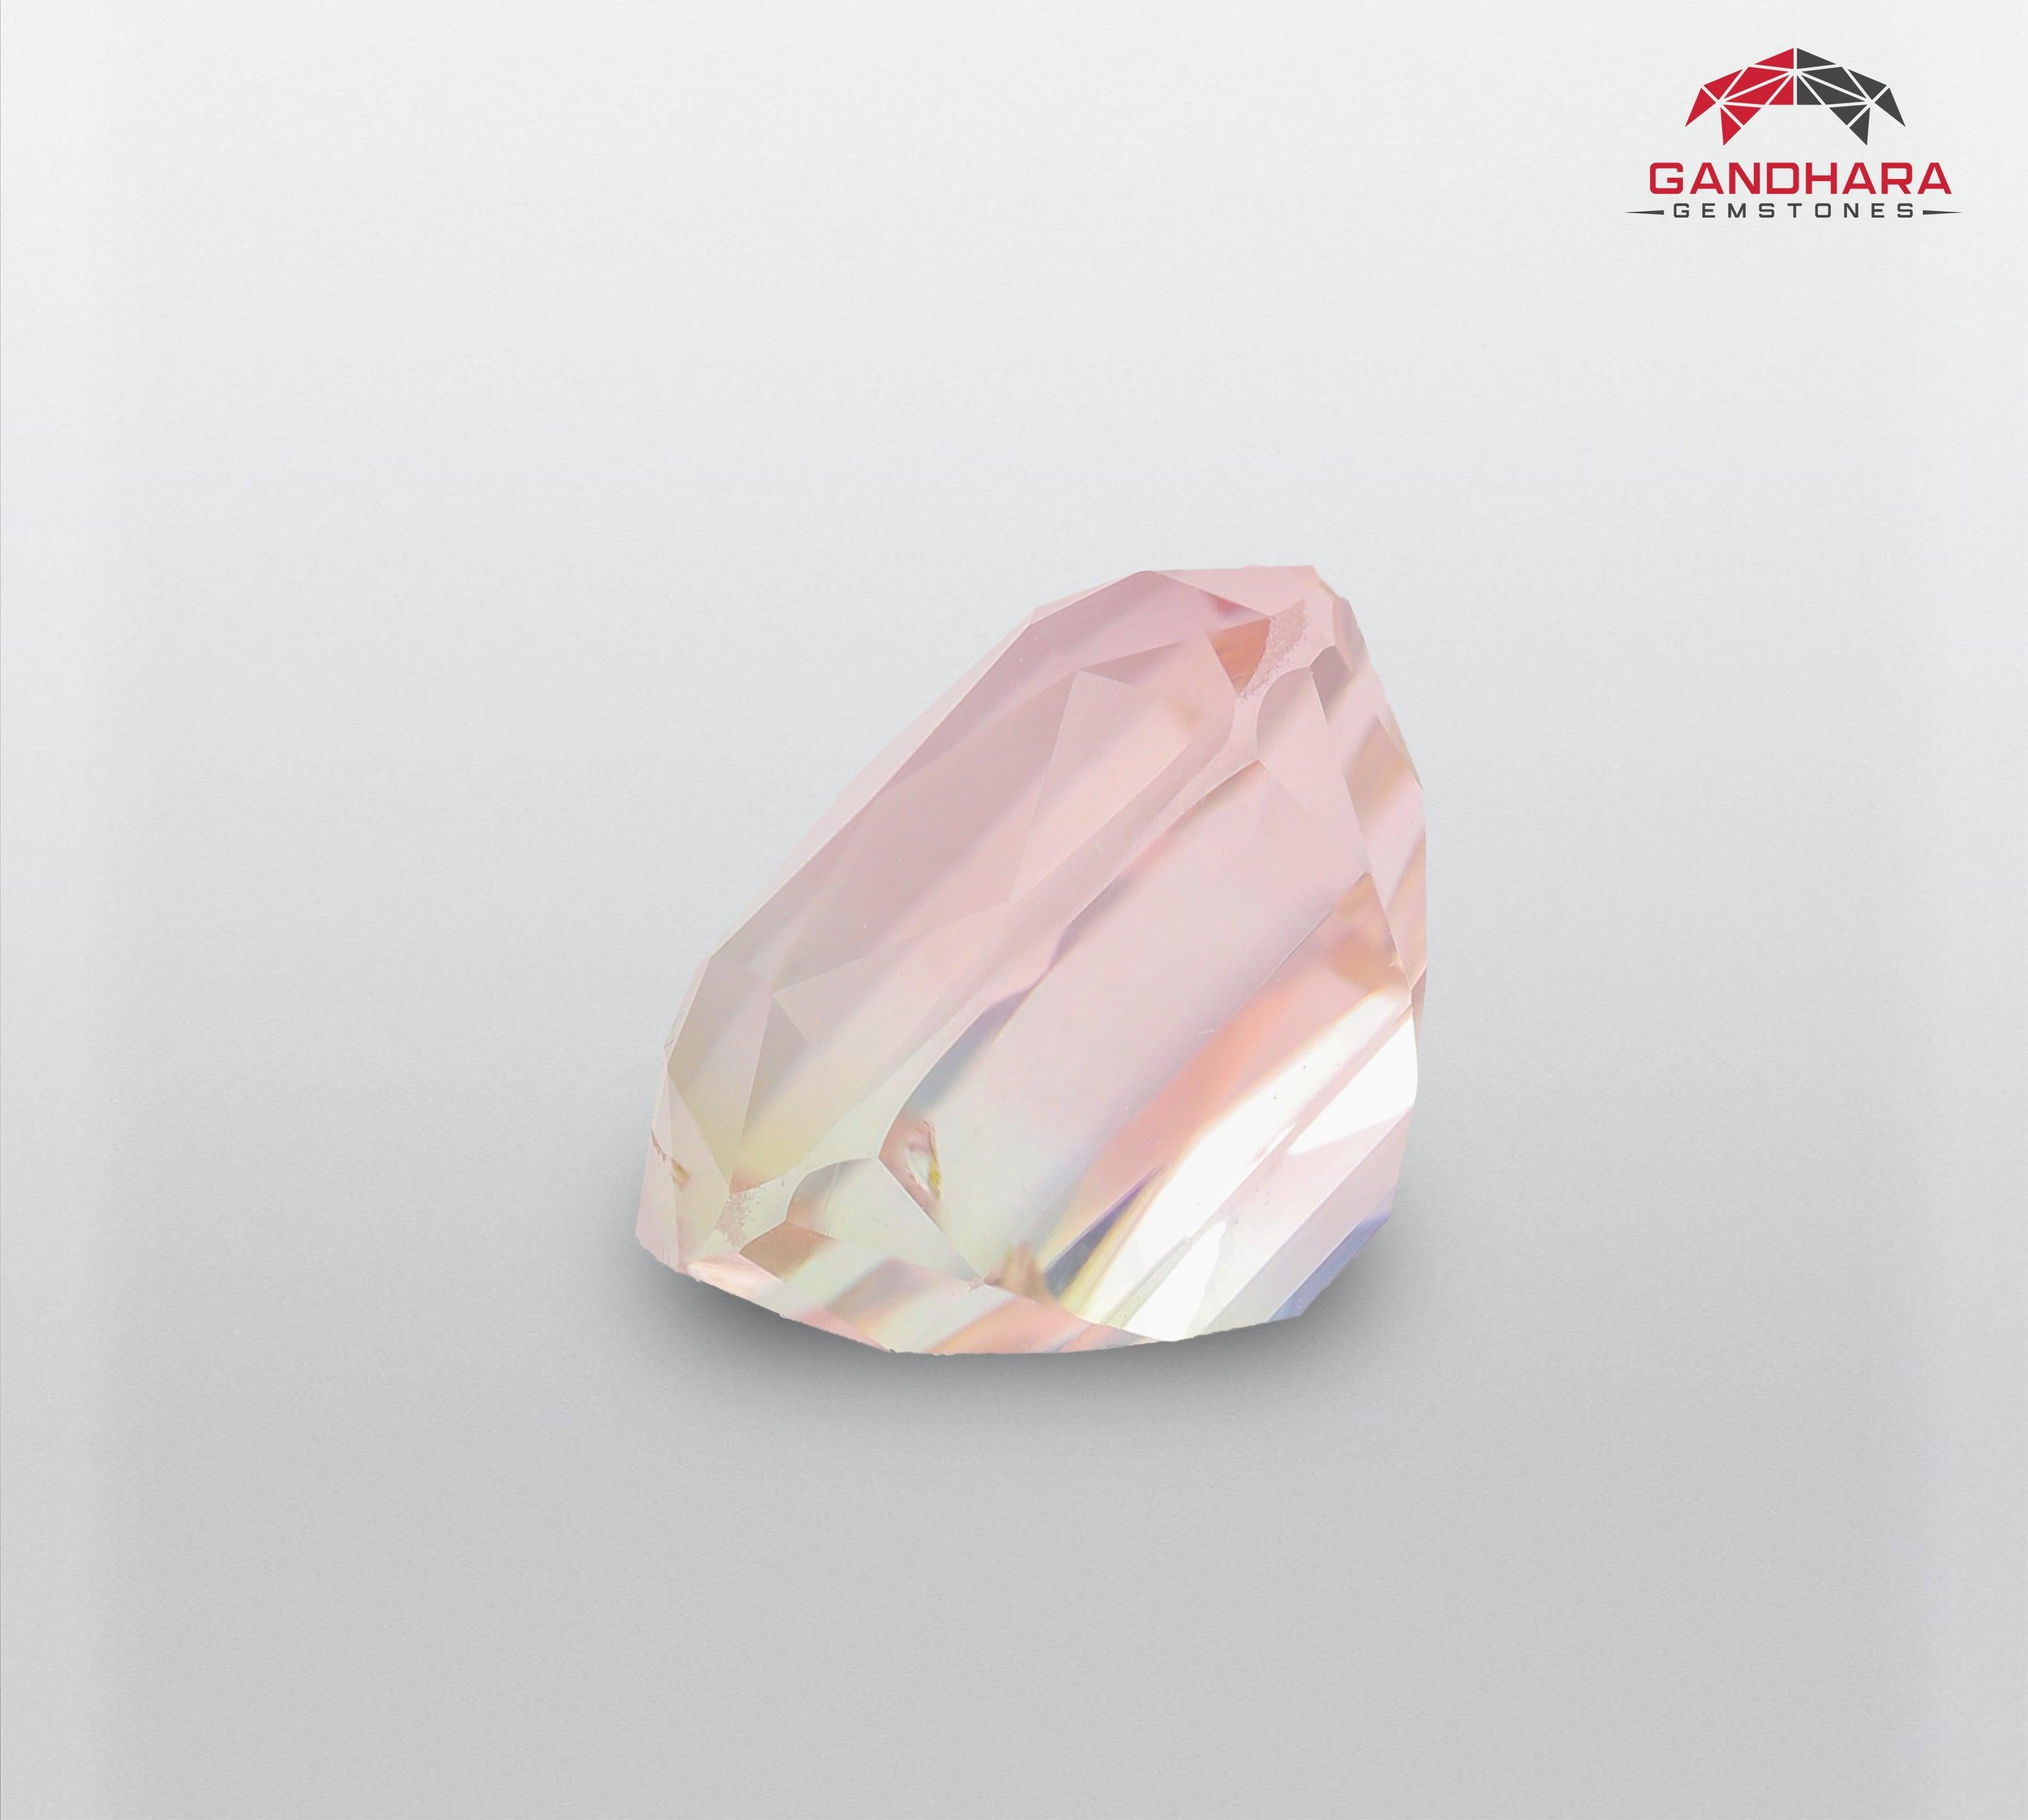 Gorgeous Light Pink Tourmaline Stone, available for sale at wholesale price, natural high-quality, 2.90 carats Loose certified Pink tourmaline gemstone from Afghanistan.

Product Information:
GEMSTONE TYPE	Gorgeous Light Pink Tourmaline